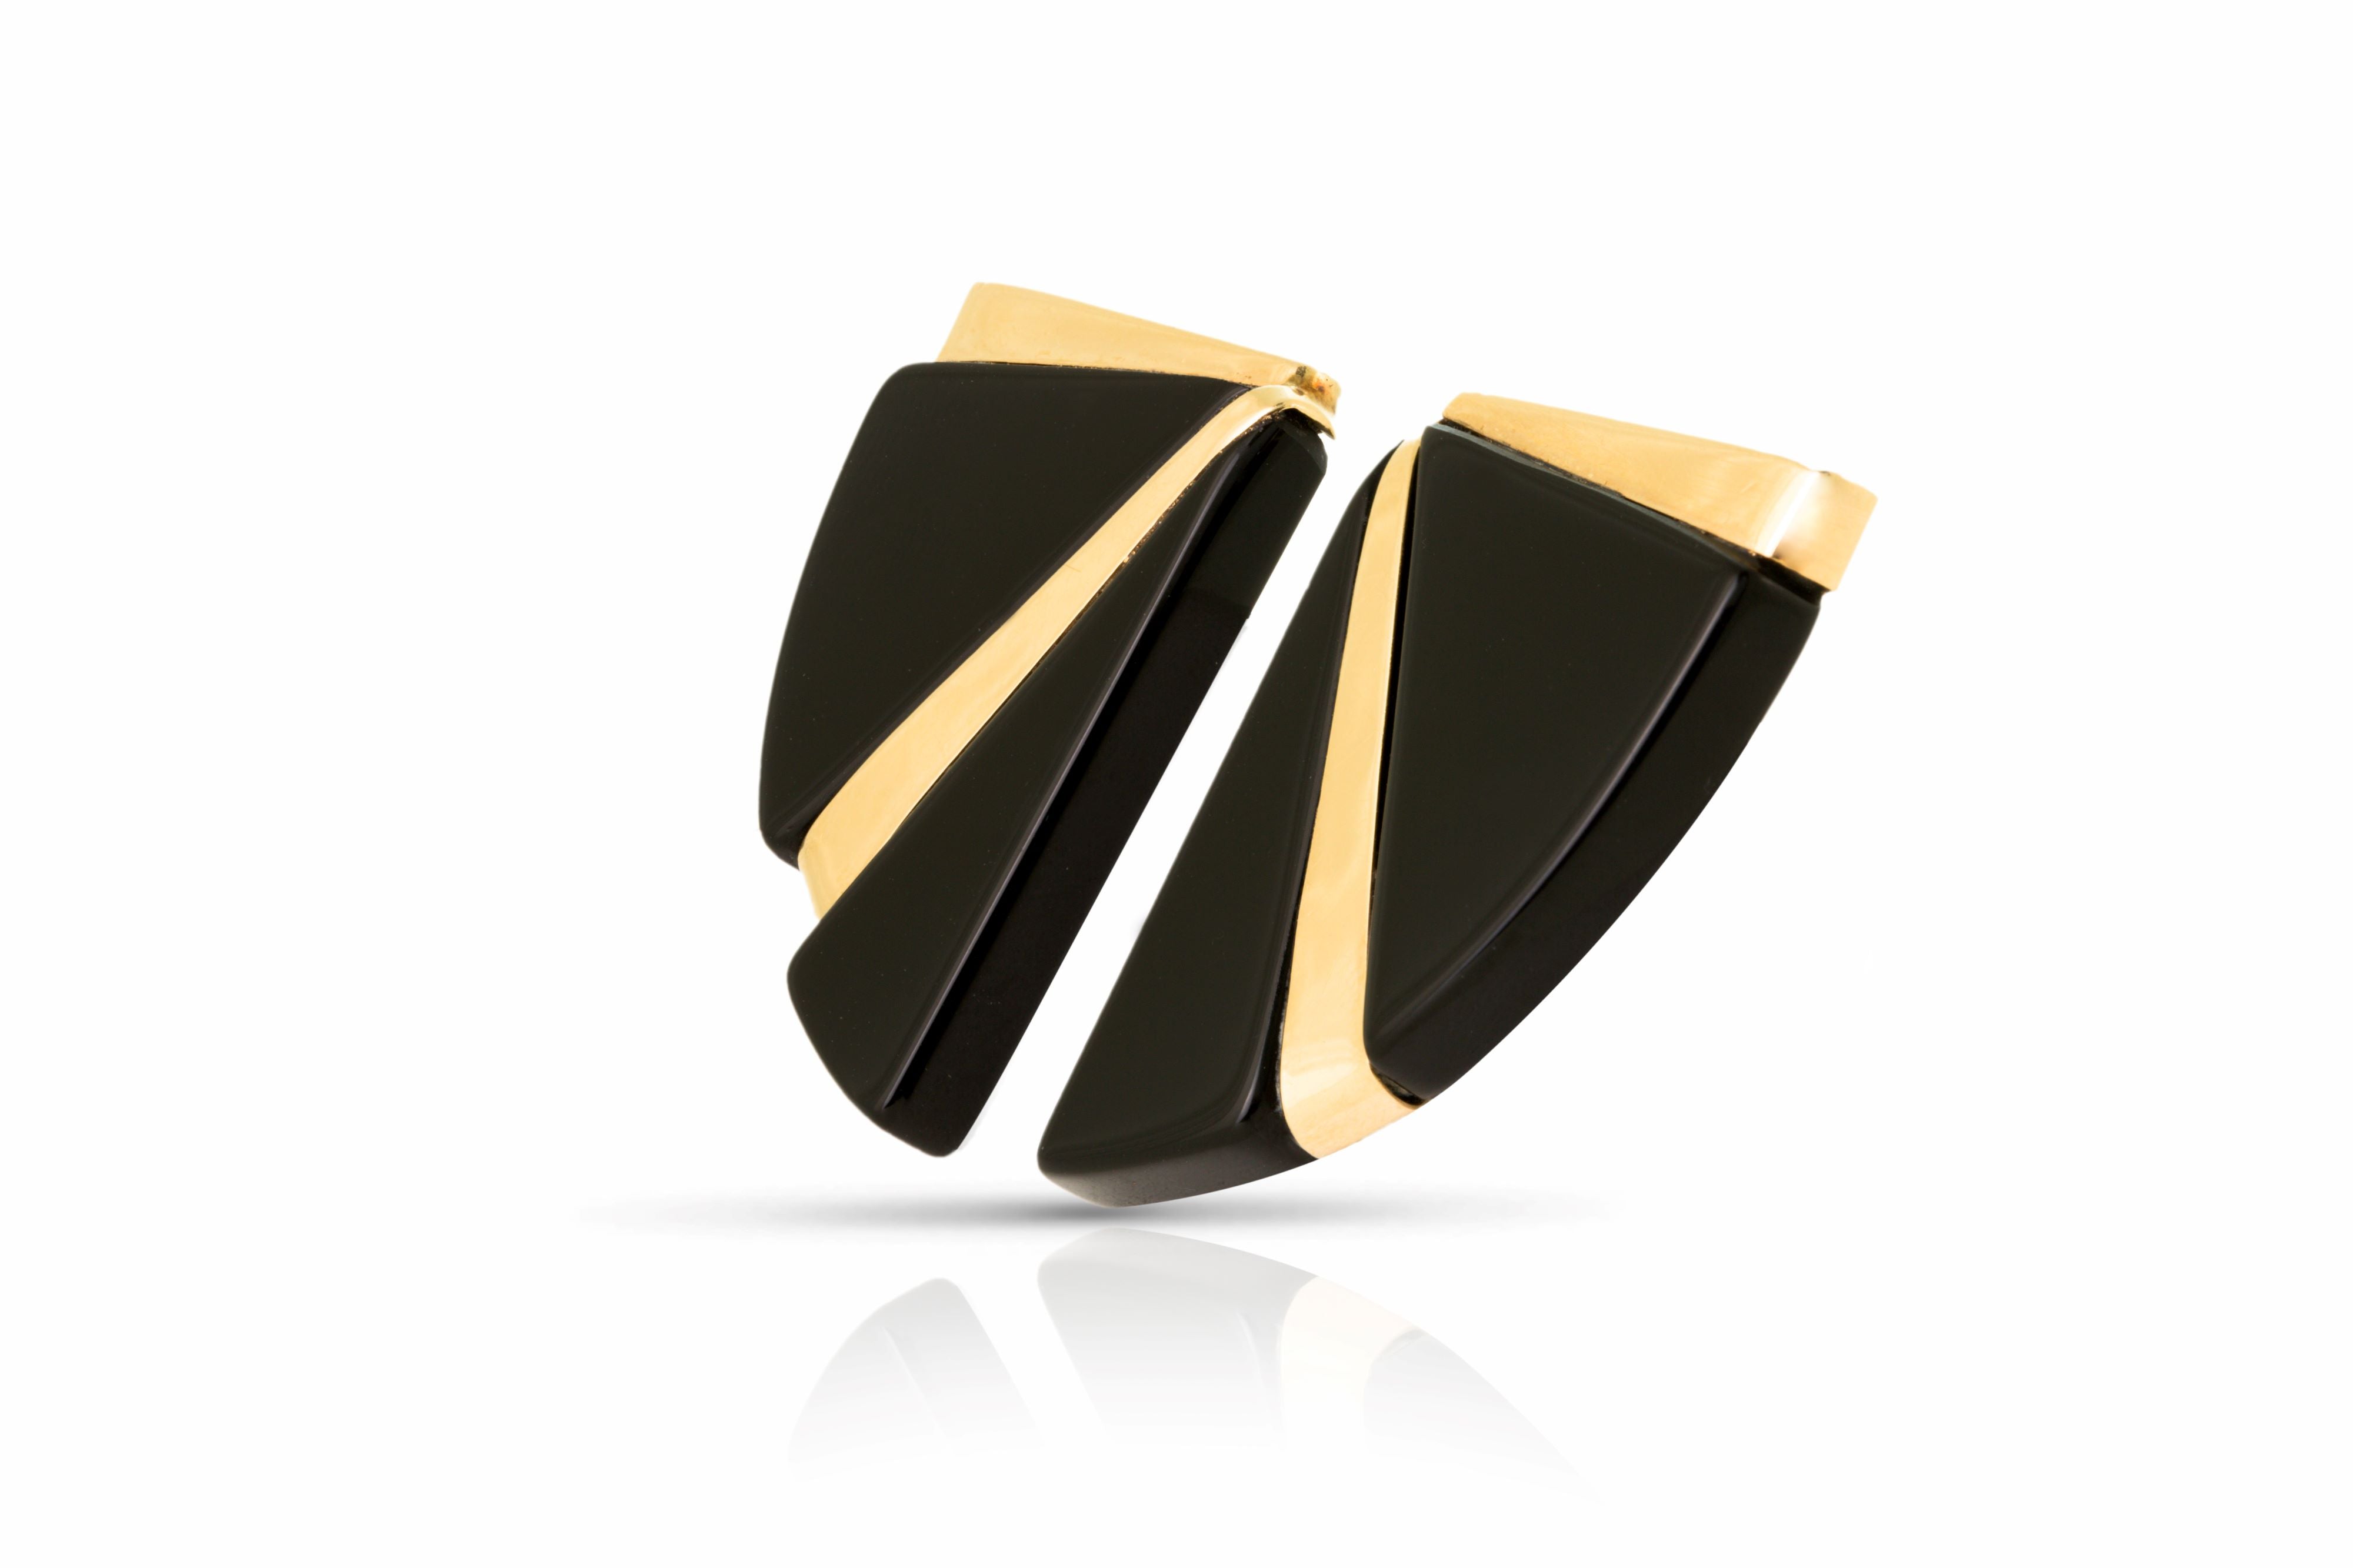 980s-1990s triangle earrings in gold and onyx fan-shaped design.